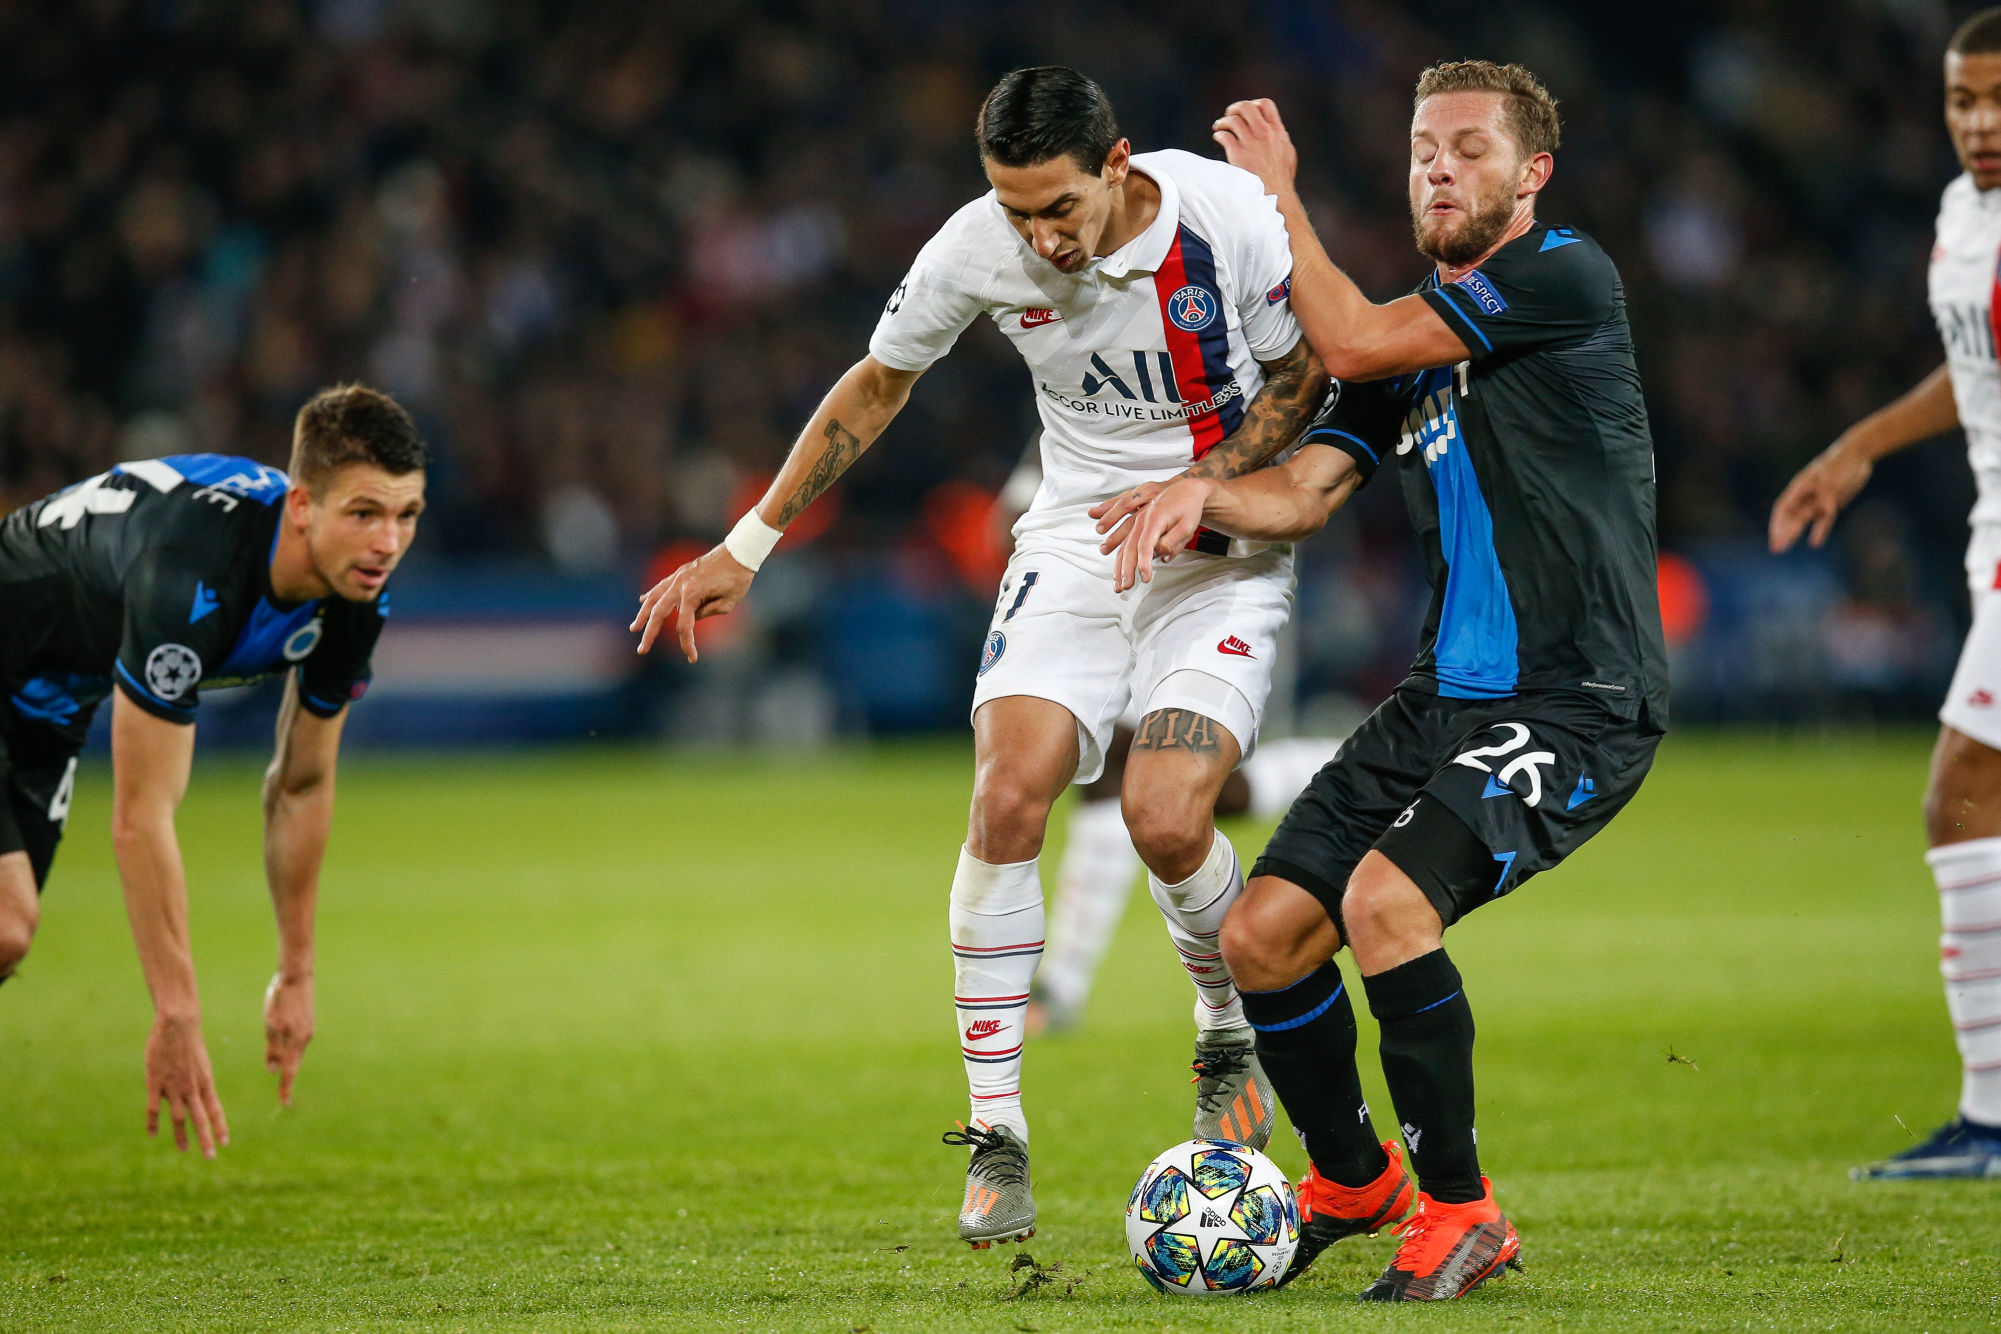 PSG's Angel Di Maria and Club's Mats Rits fight for the ball during the match between French club Paris Saint-Germain Football Club and Belgian soccer team Club Brugge KV, Wednesday 06 November 2019 in Paris, France, on day four in Group A, in the first round of the UEFA Champions League. BELGA PHOTO BRUNO FAHY 

Photo by Icon Sport - Angel DI MARIA - Mats RITS - Parc des Princes - Paris (France)